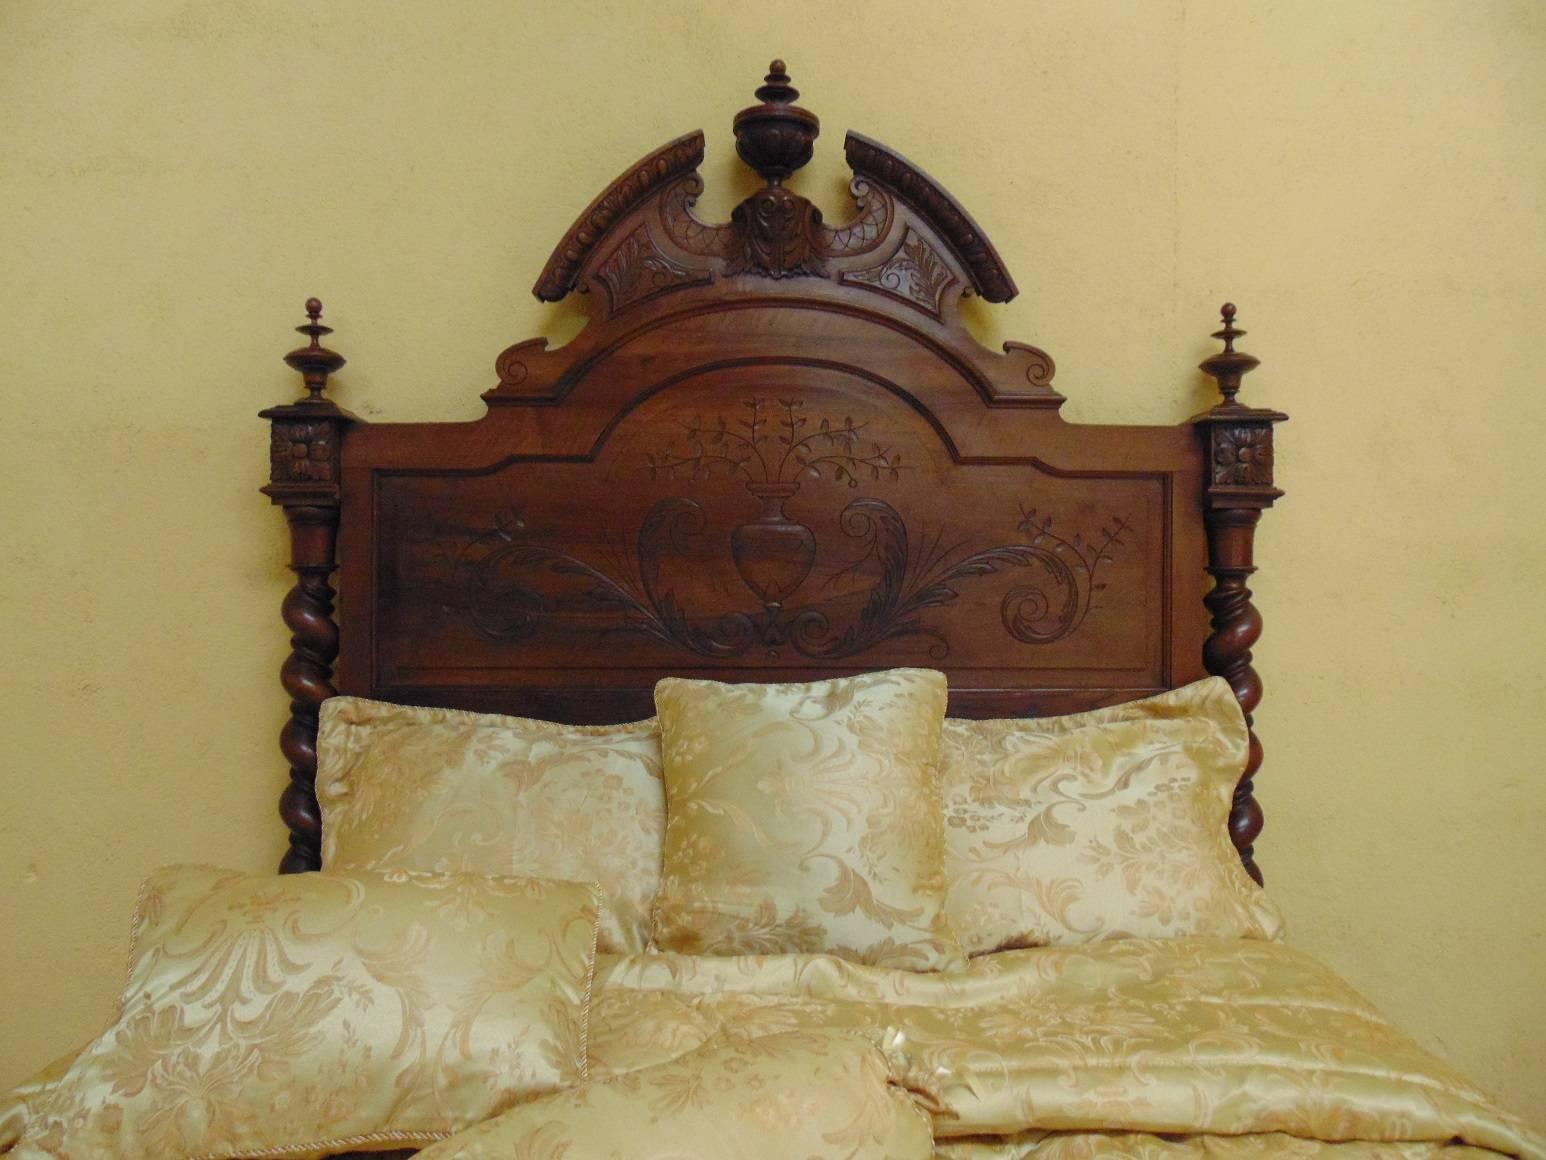 Unusually fine quality hand-carved Renaissance Revival chateau bed in the Louis XIII style in solid walnut, circa 1880.
PLEASE NOTE 
European beds of this age very seldom conform to modern mattress sizes. We therefore provide free with every bed we